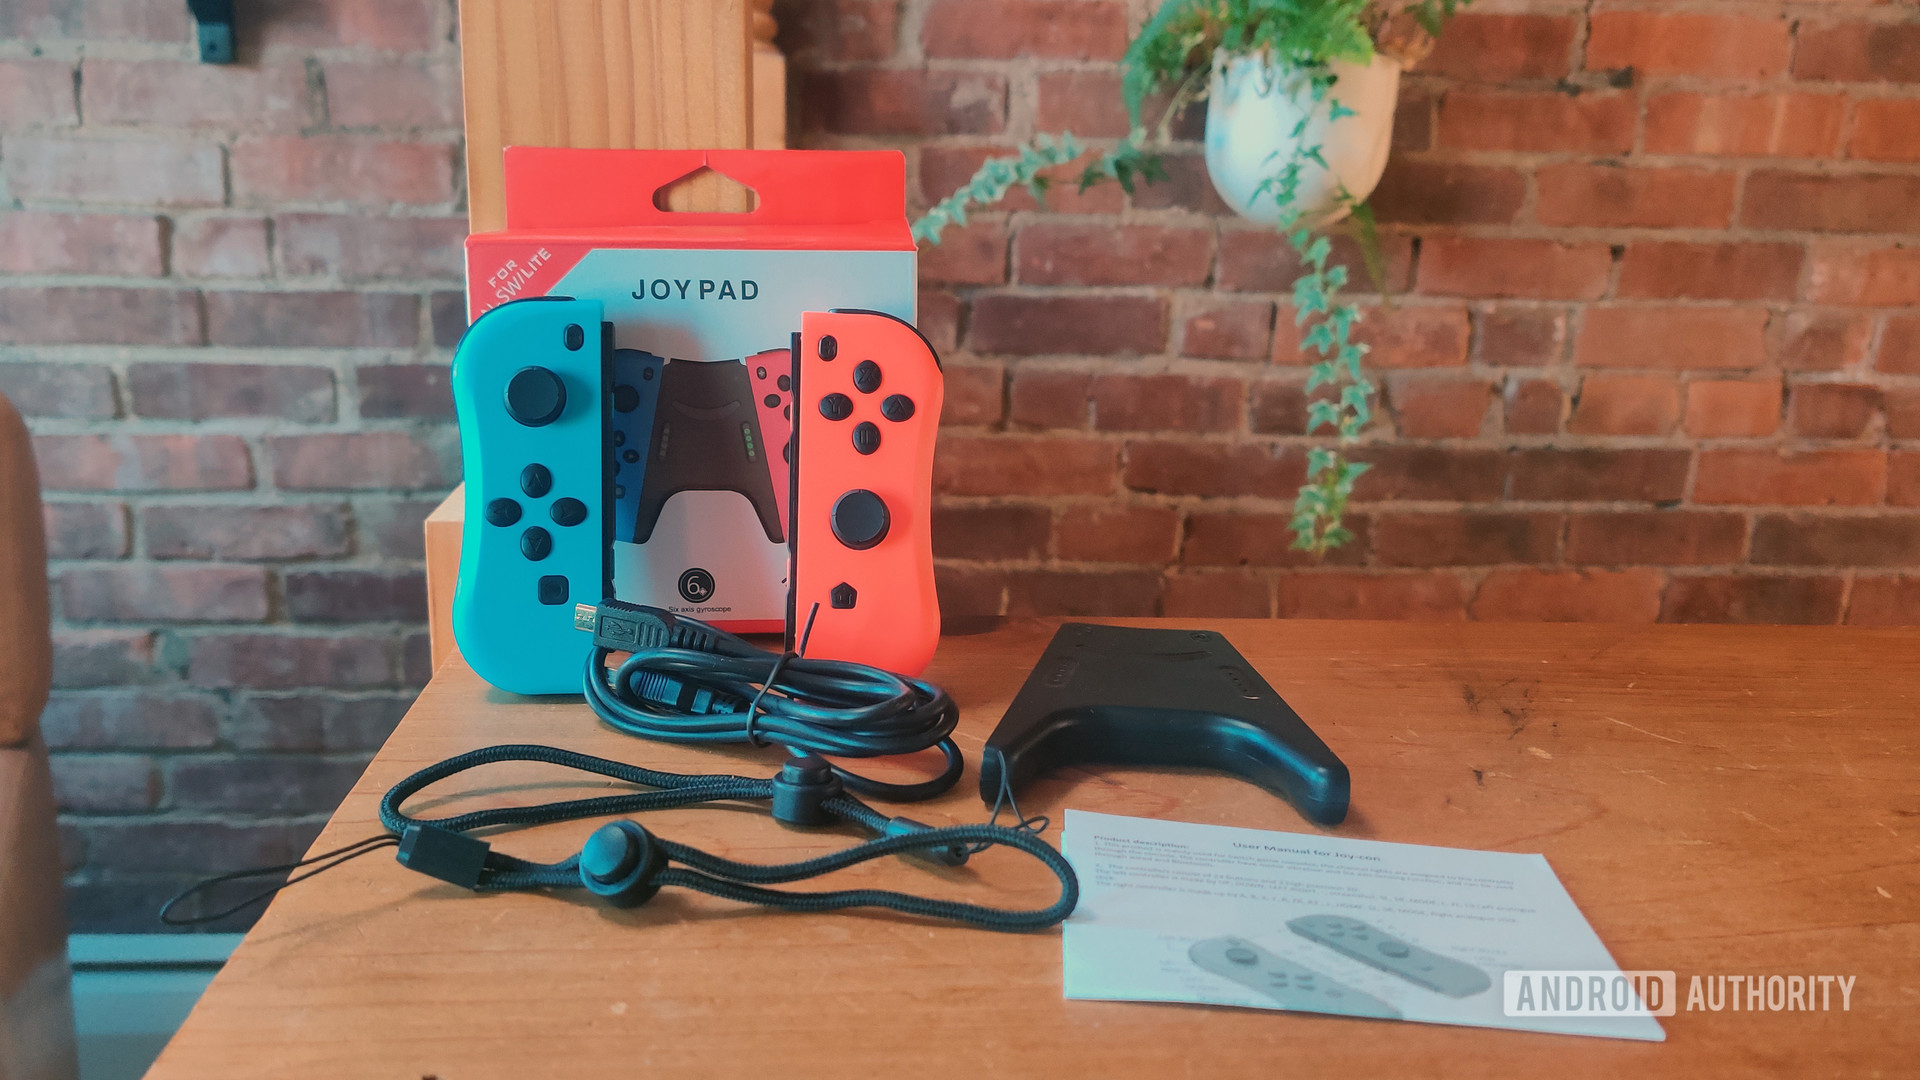 KINVOCA Joypad Controller for Nintendo Switch Review Box Contents